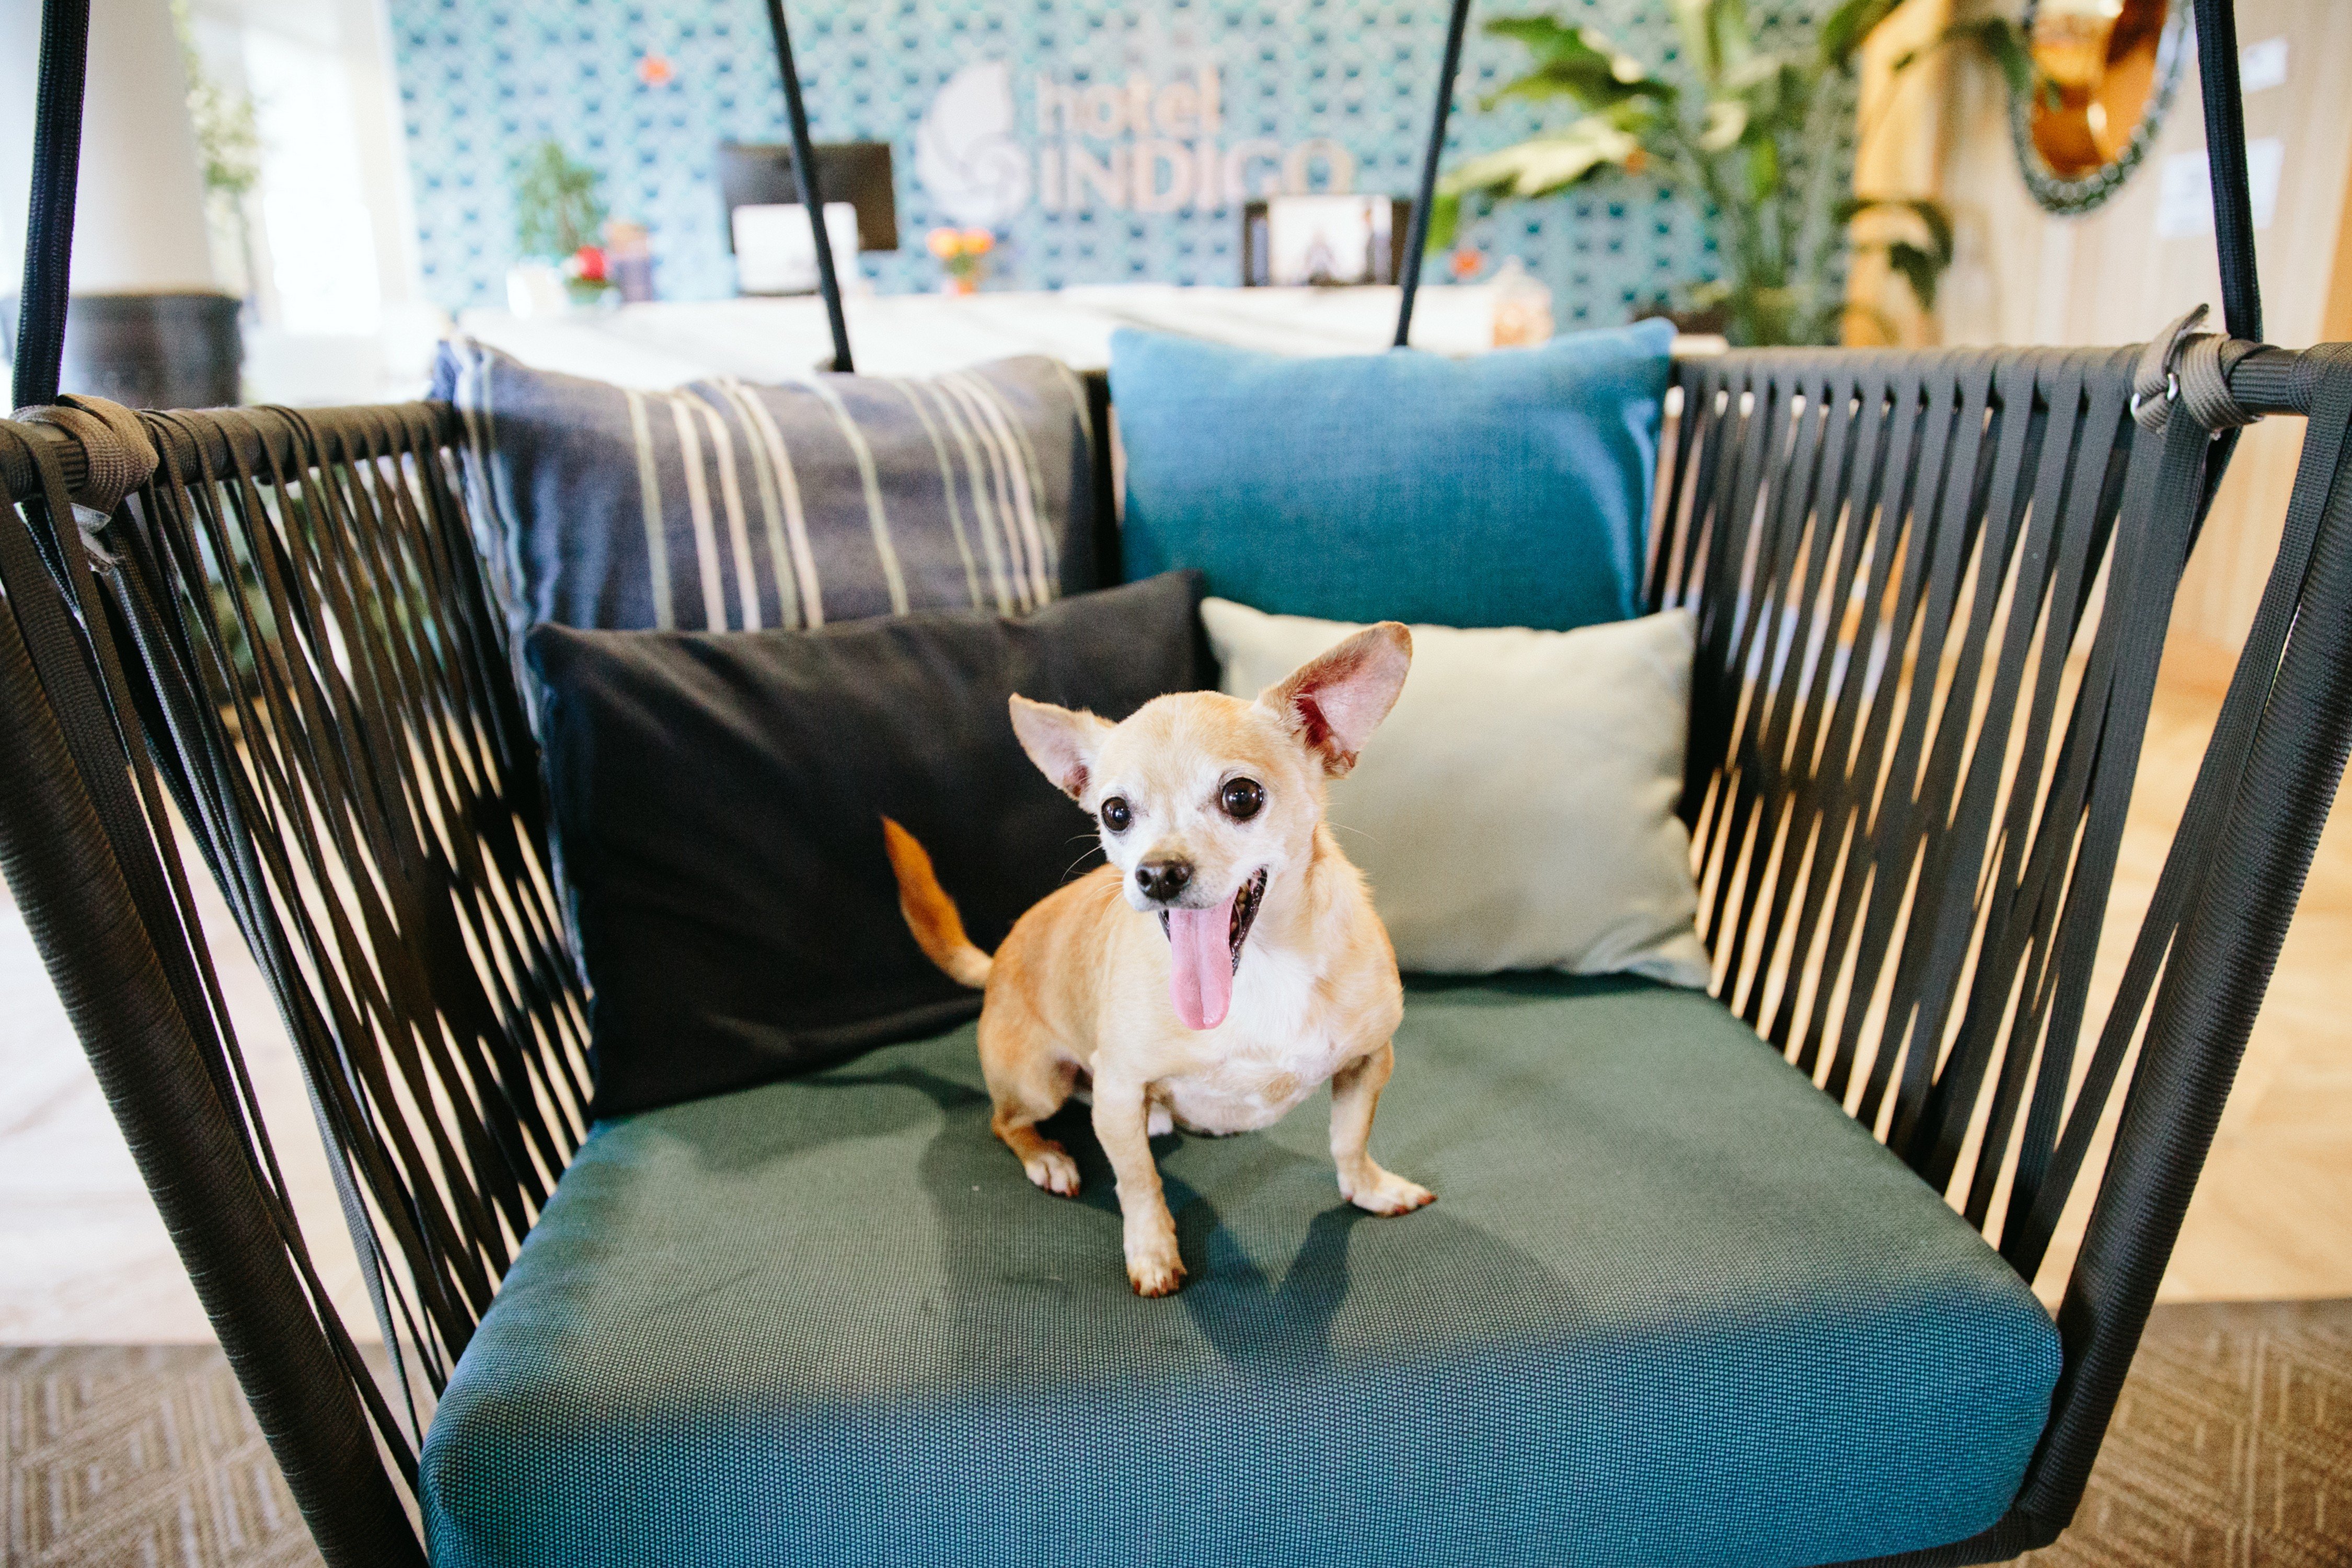 At Hotel Indigo we know your Dog is part of the family 